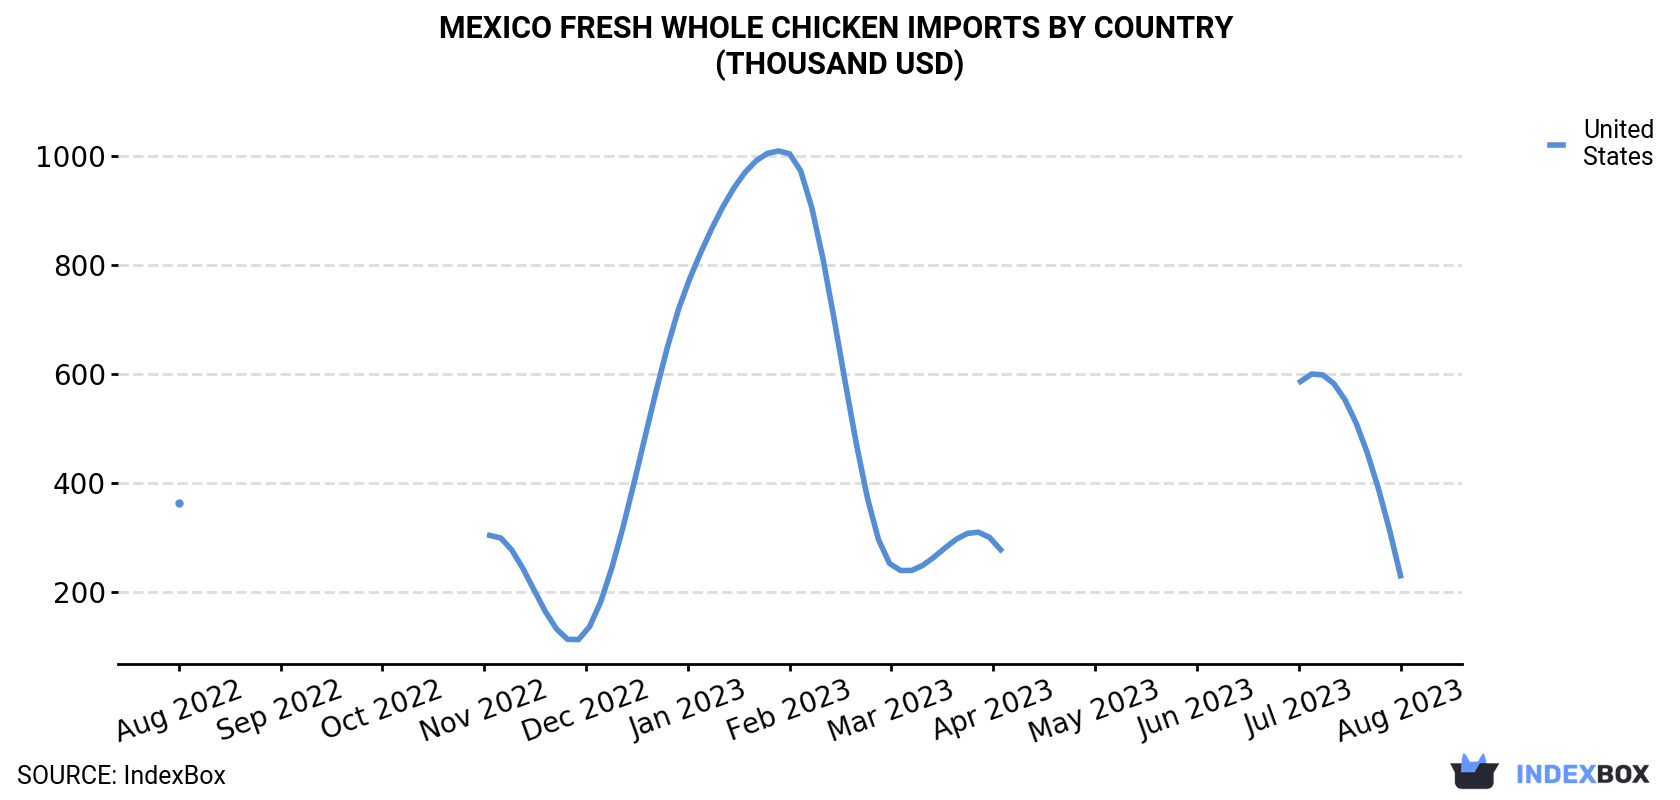 Mexico Fresh Whole Chicken Imports By Country (Thousand USD)